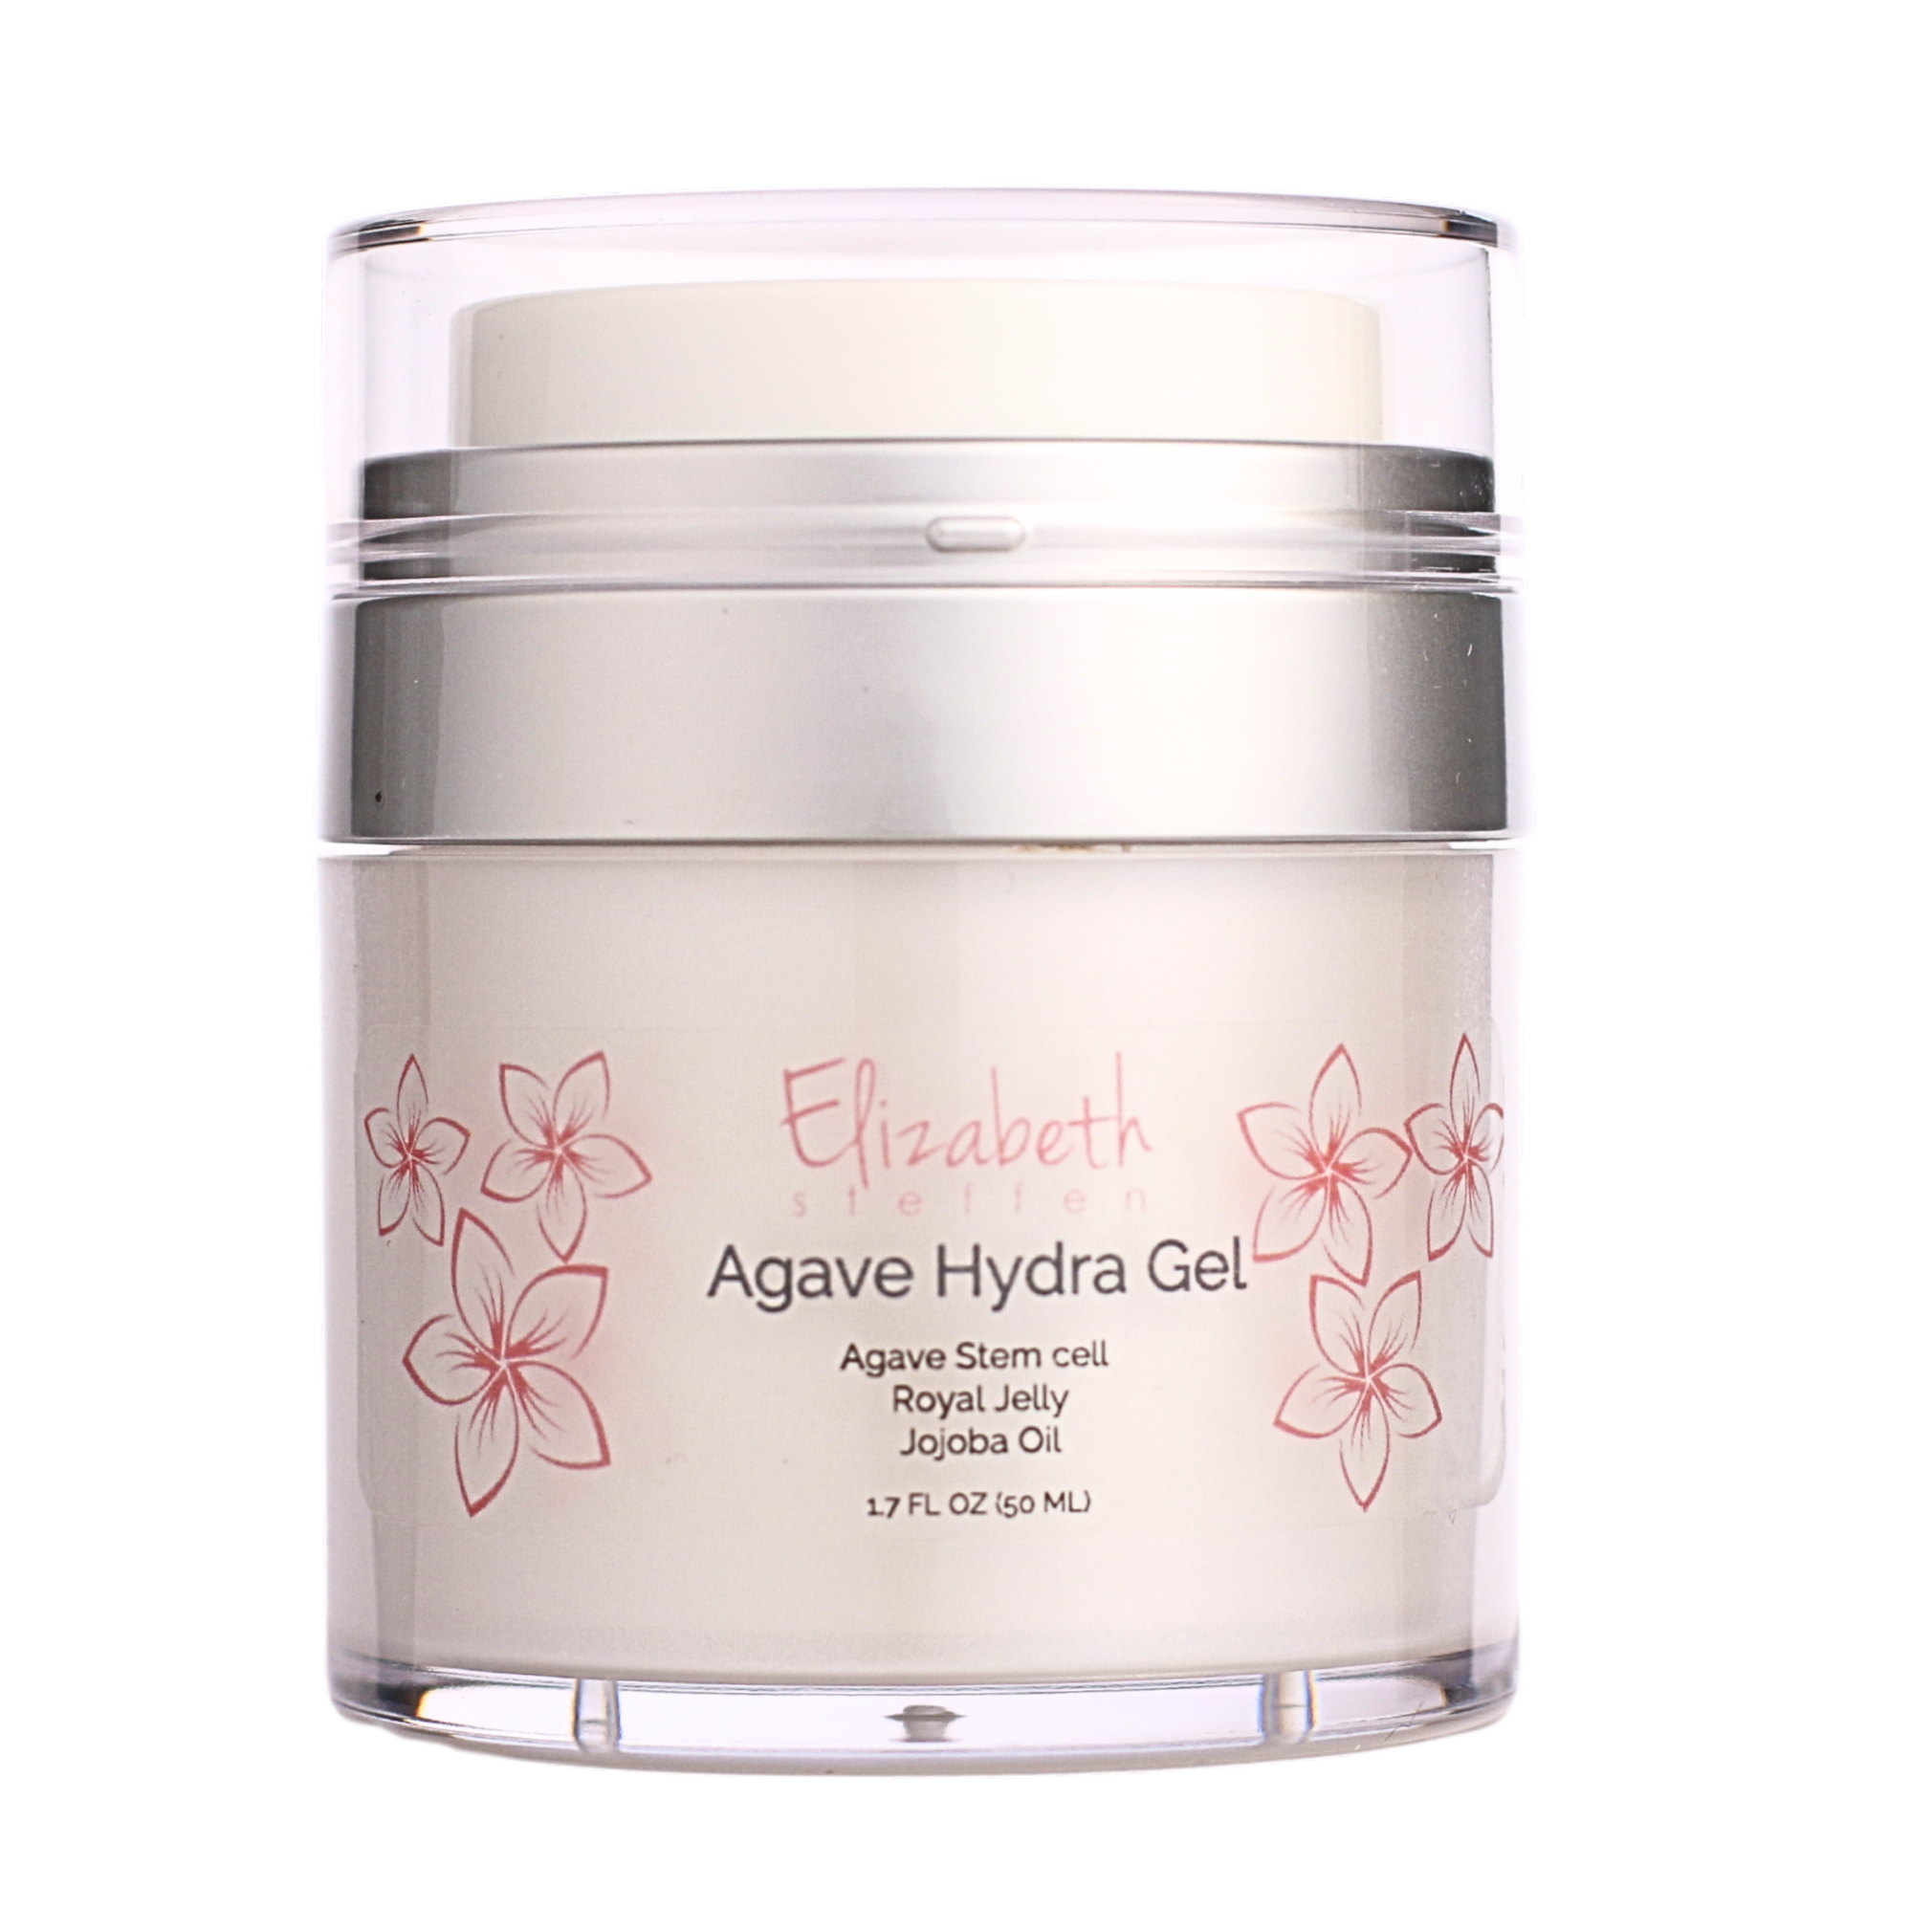 A jar of moisturizer formulated with agave stem cells, royal jelly and jojoba oil